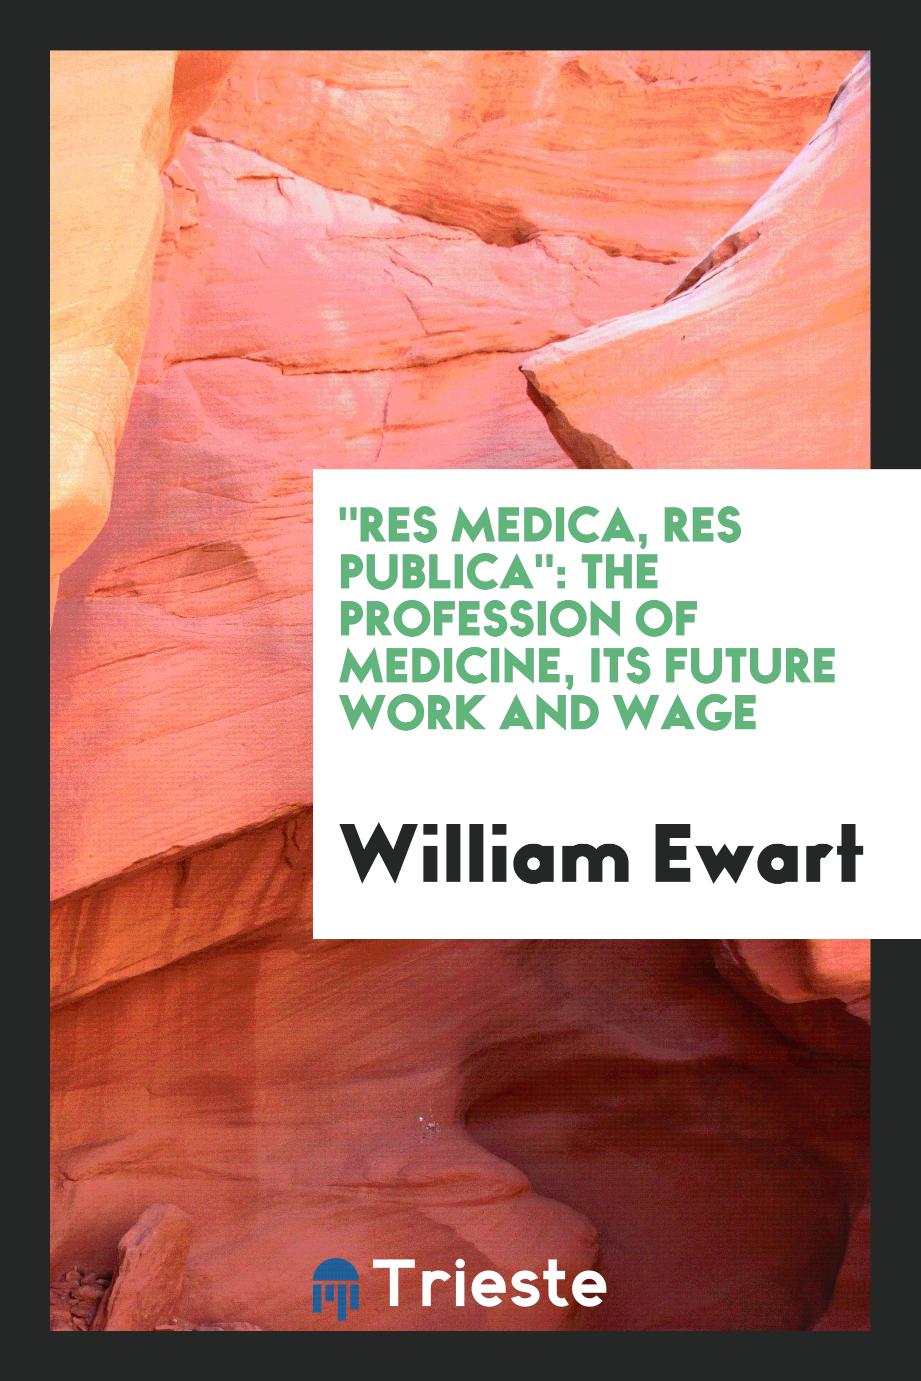 "Res medica, res publica": The Profession of Medicine, Its Future Work and Wage